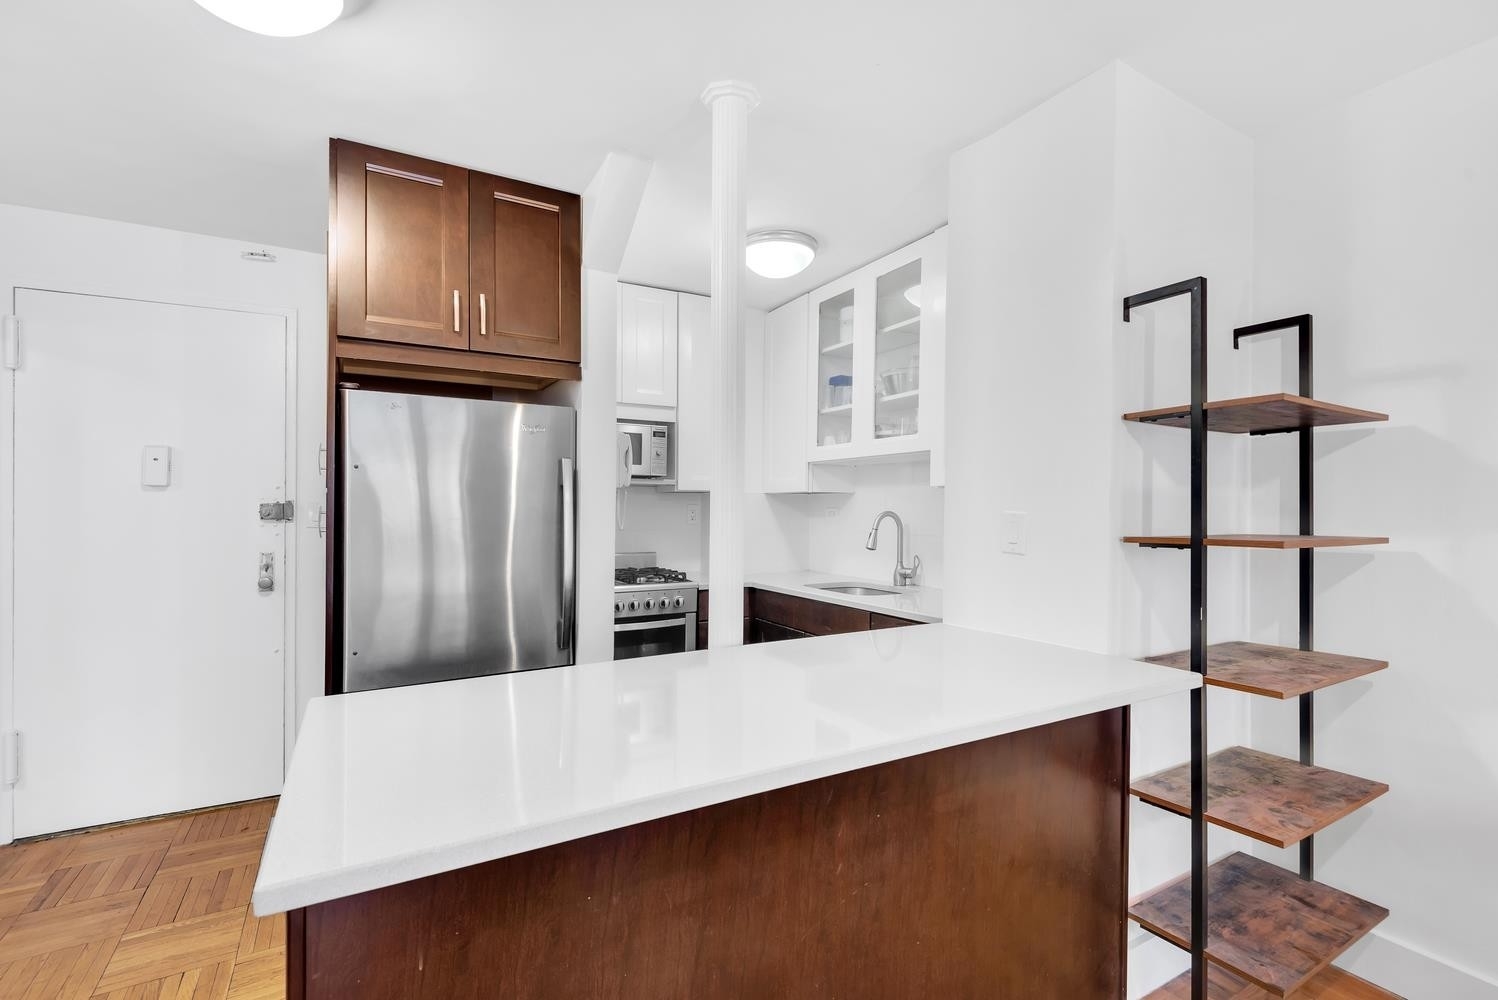 Co-op Properties for Sale at 160 E 27TH ST, 5F Kip's Bay, New York, NY 10016